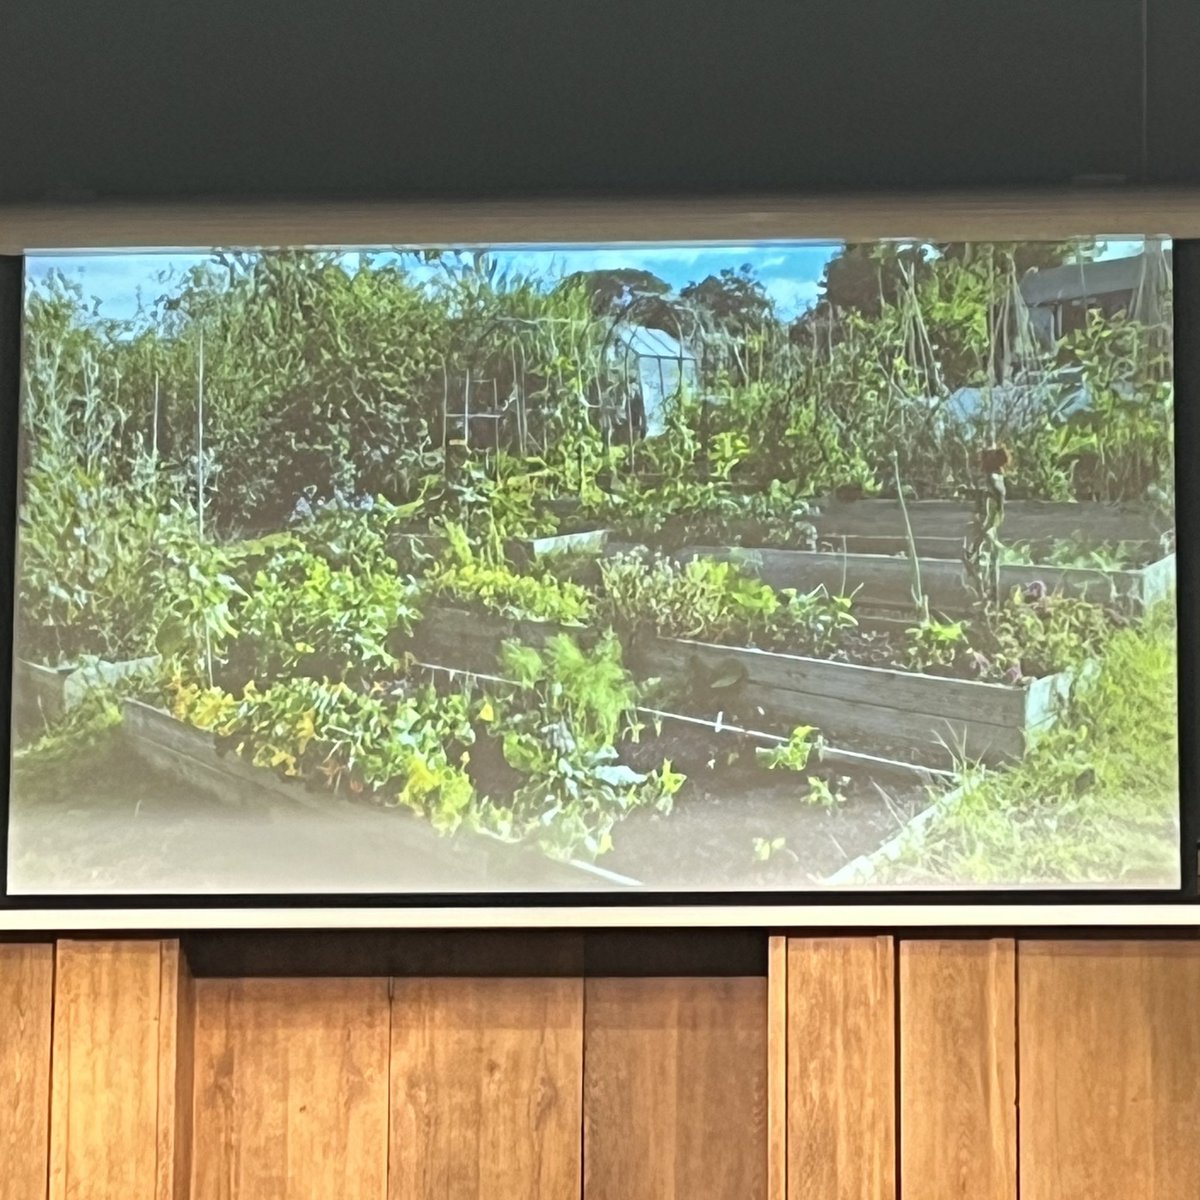 The power/joy of soil by @janethughes - seeds can be an act of rebellion against the Winter and microcritters need love (and investigation!) too. ‘Look after a little bit of the Earth’. Peat bogs for the win. #blackgold